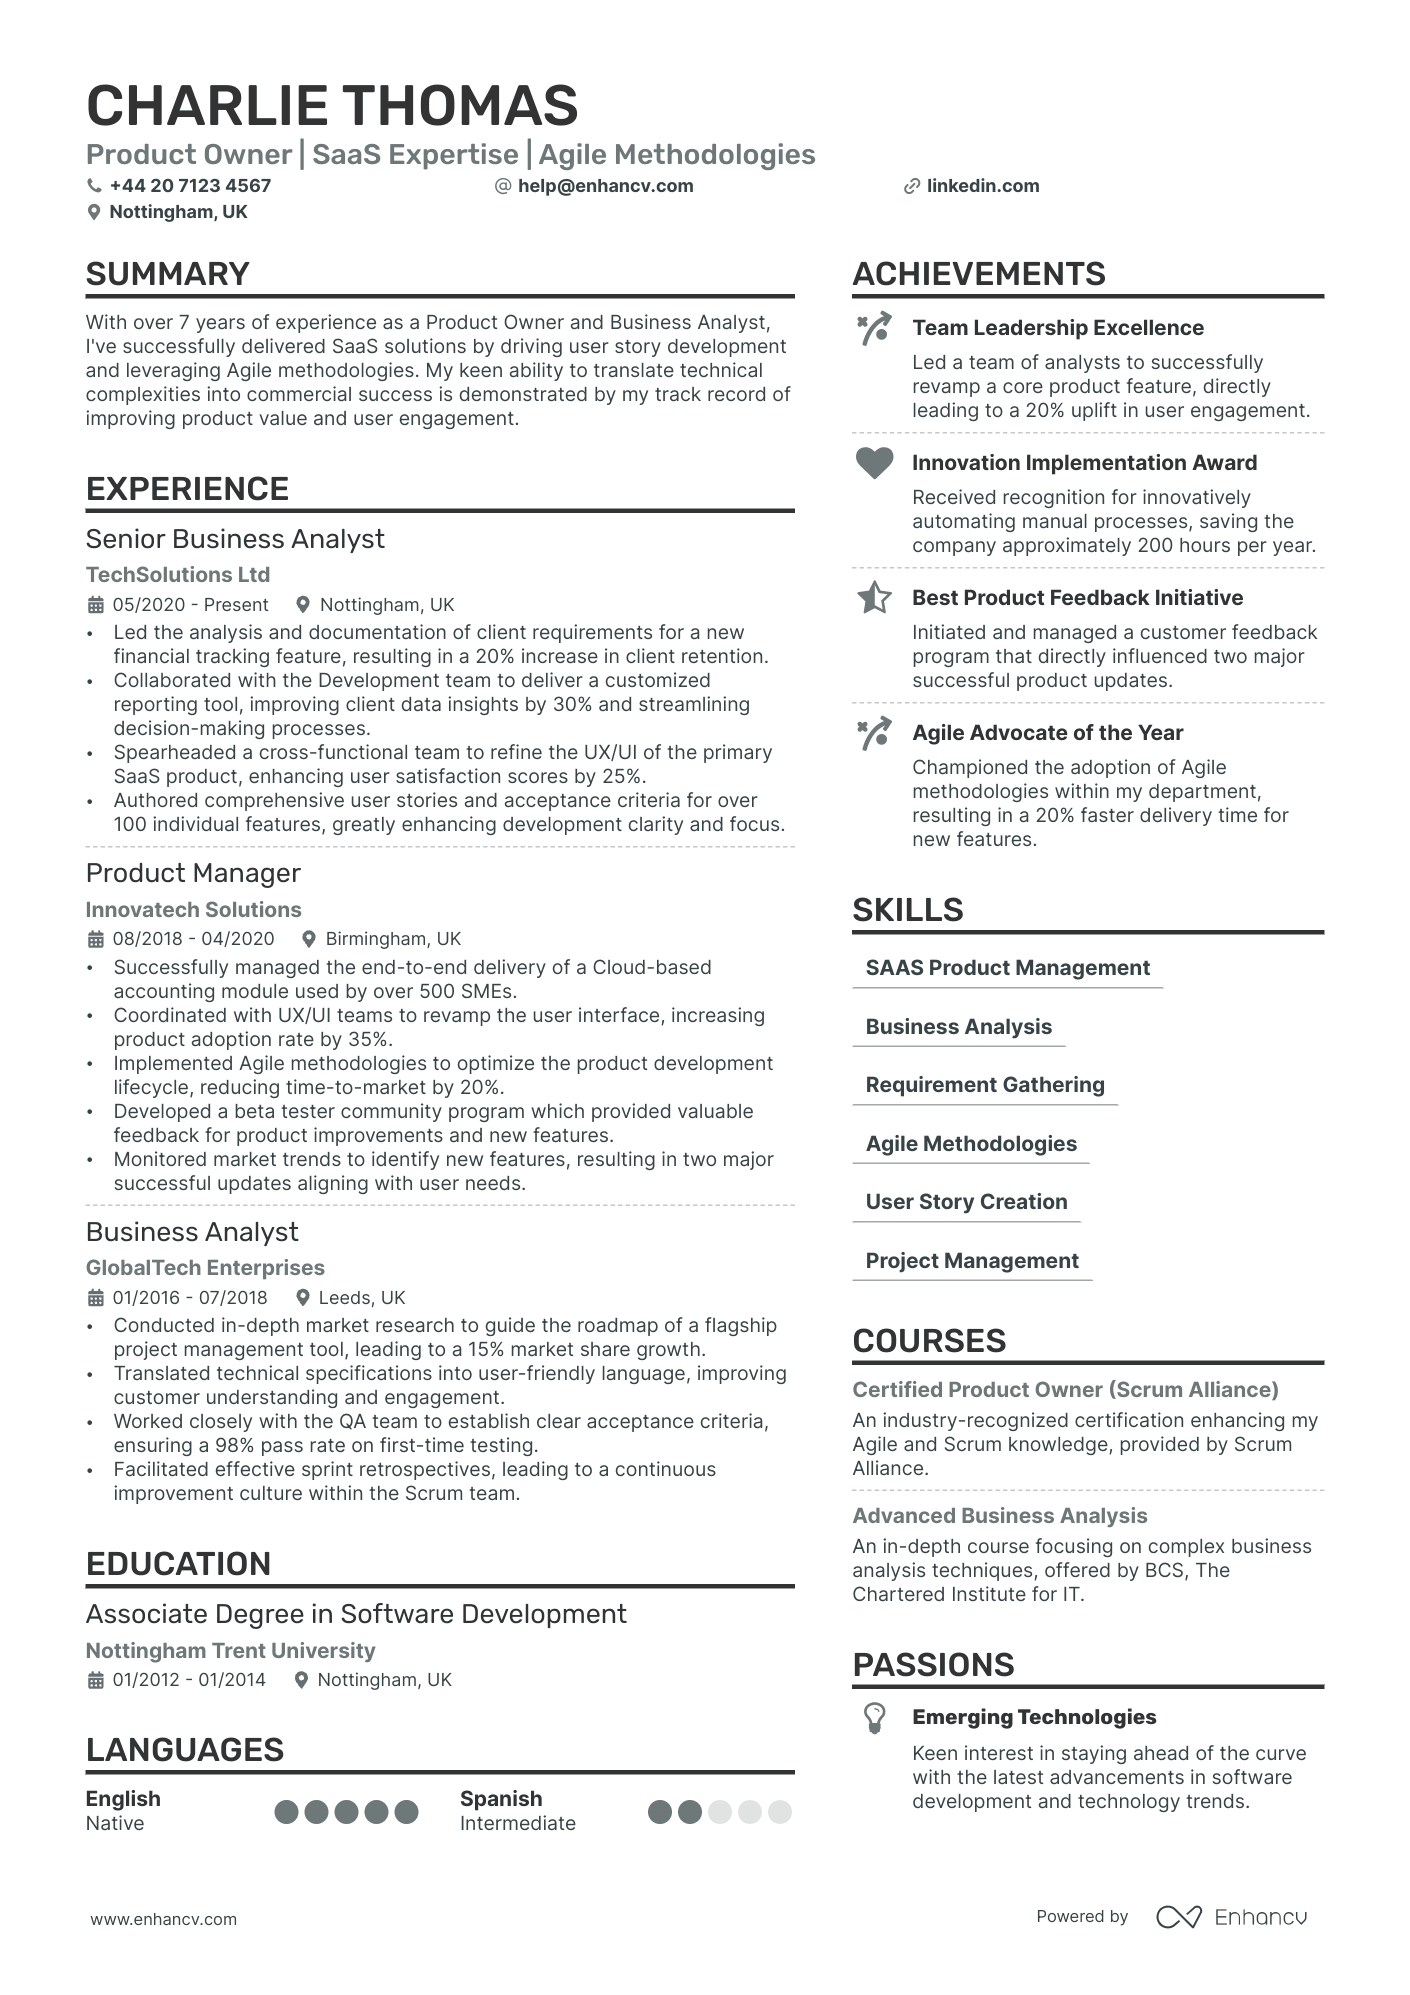 Product Owner cv example